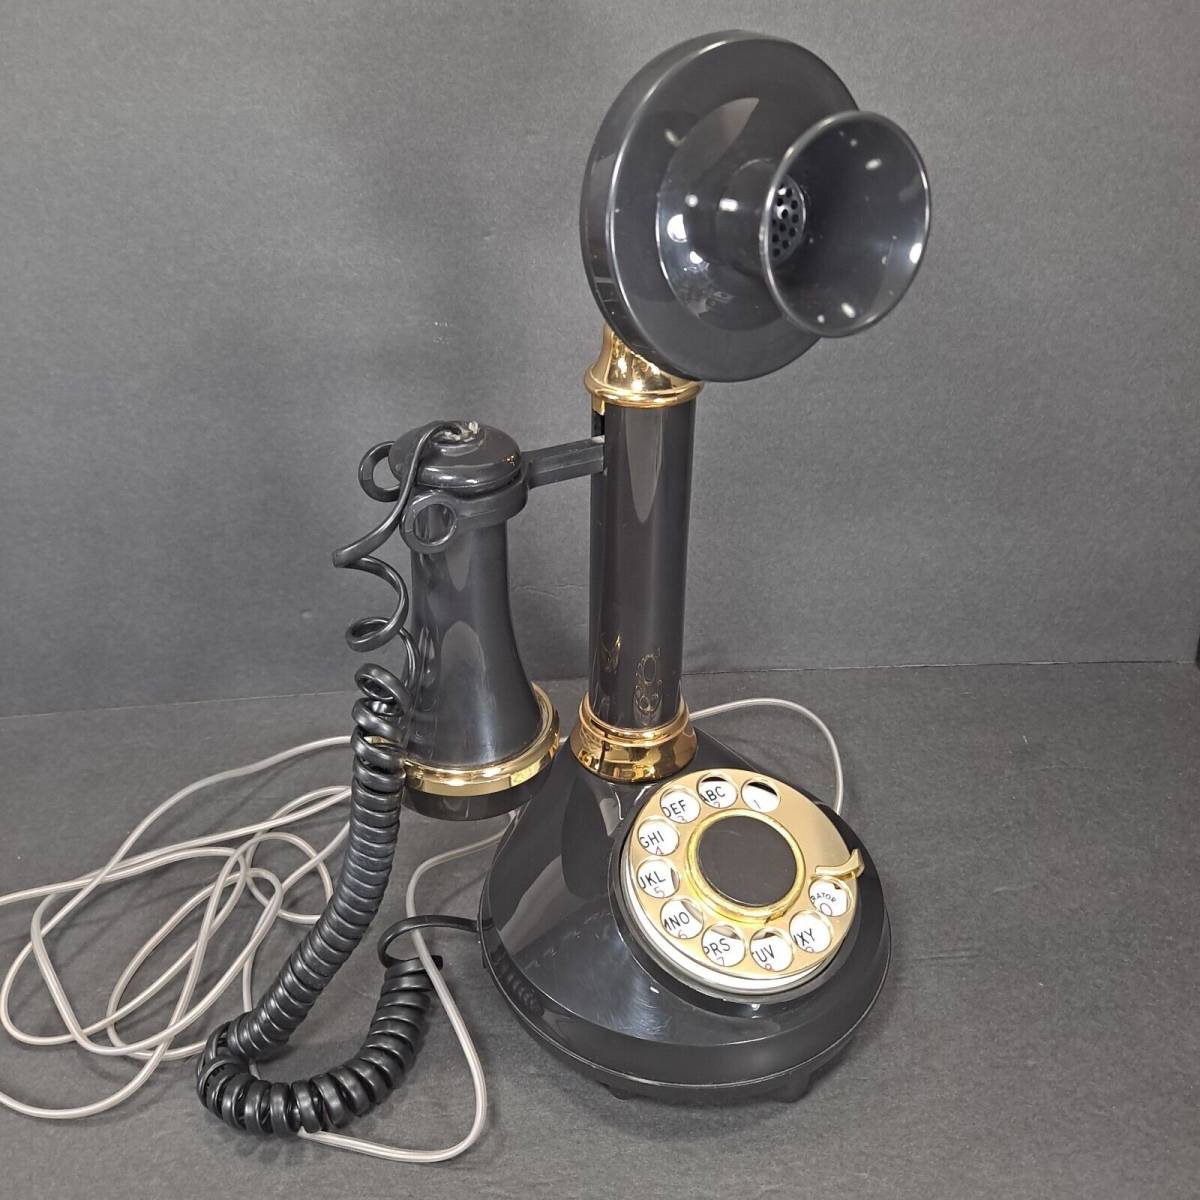 SALE／37%OFF】 ☆ Western Electric 1973 ヴィンテージ テレフォン